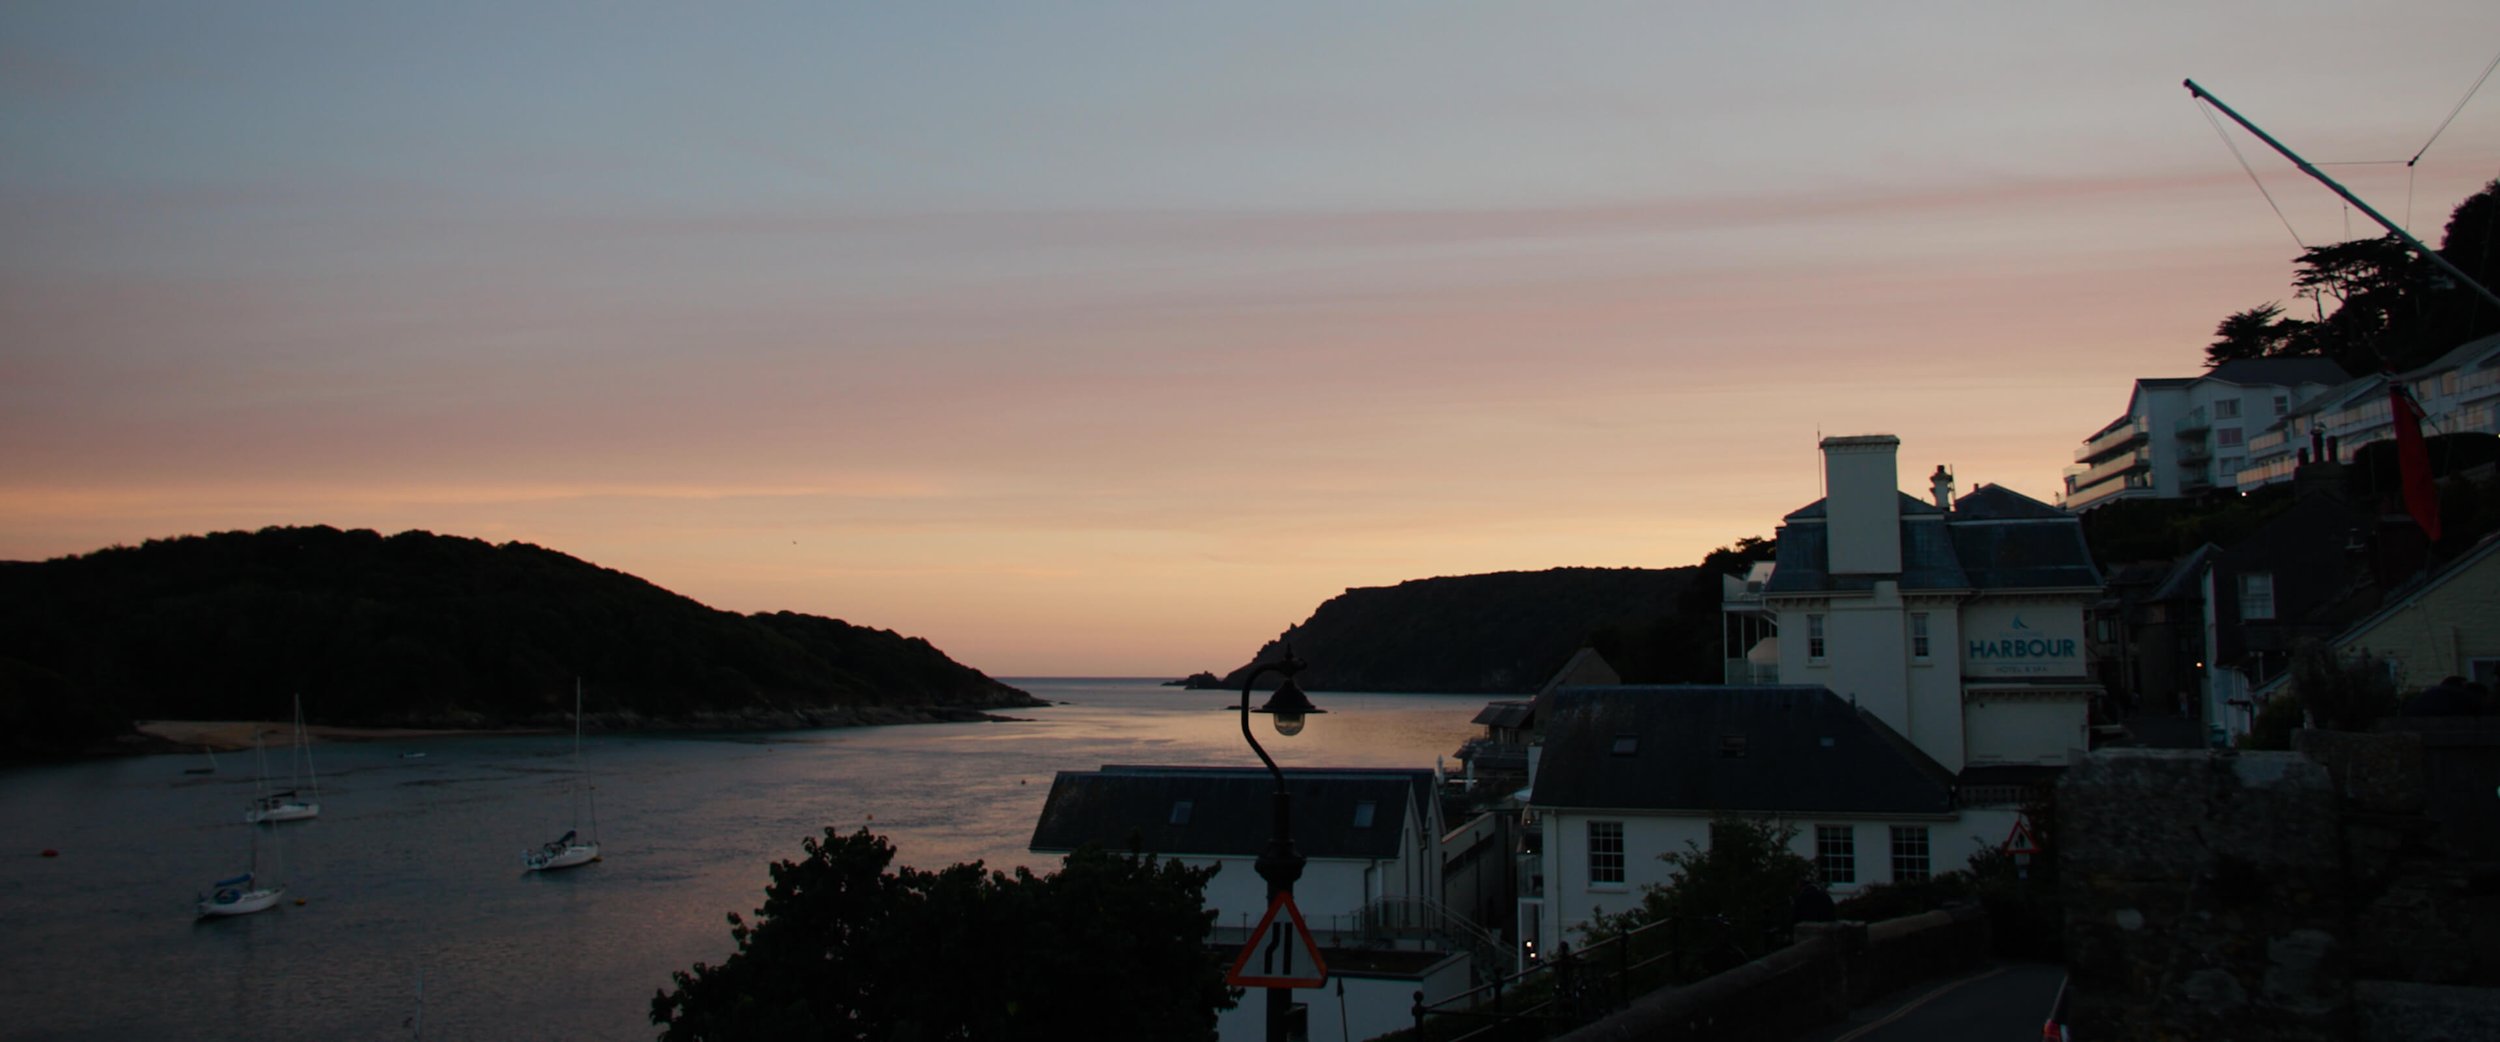 Sunset over the Salcombe Estuary with Salcombe Harbour Hotel &amp; Spa included